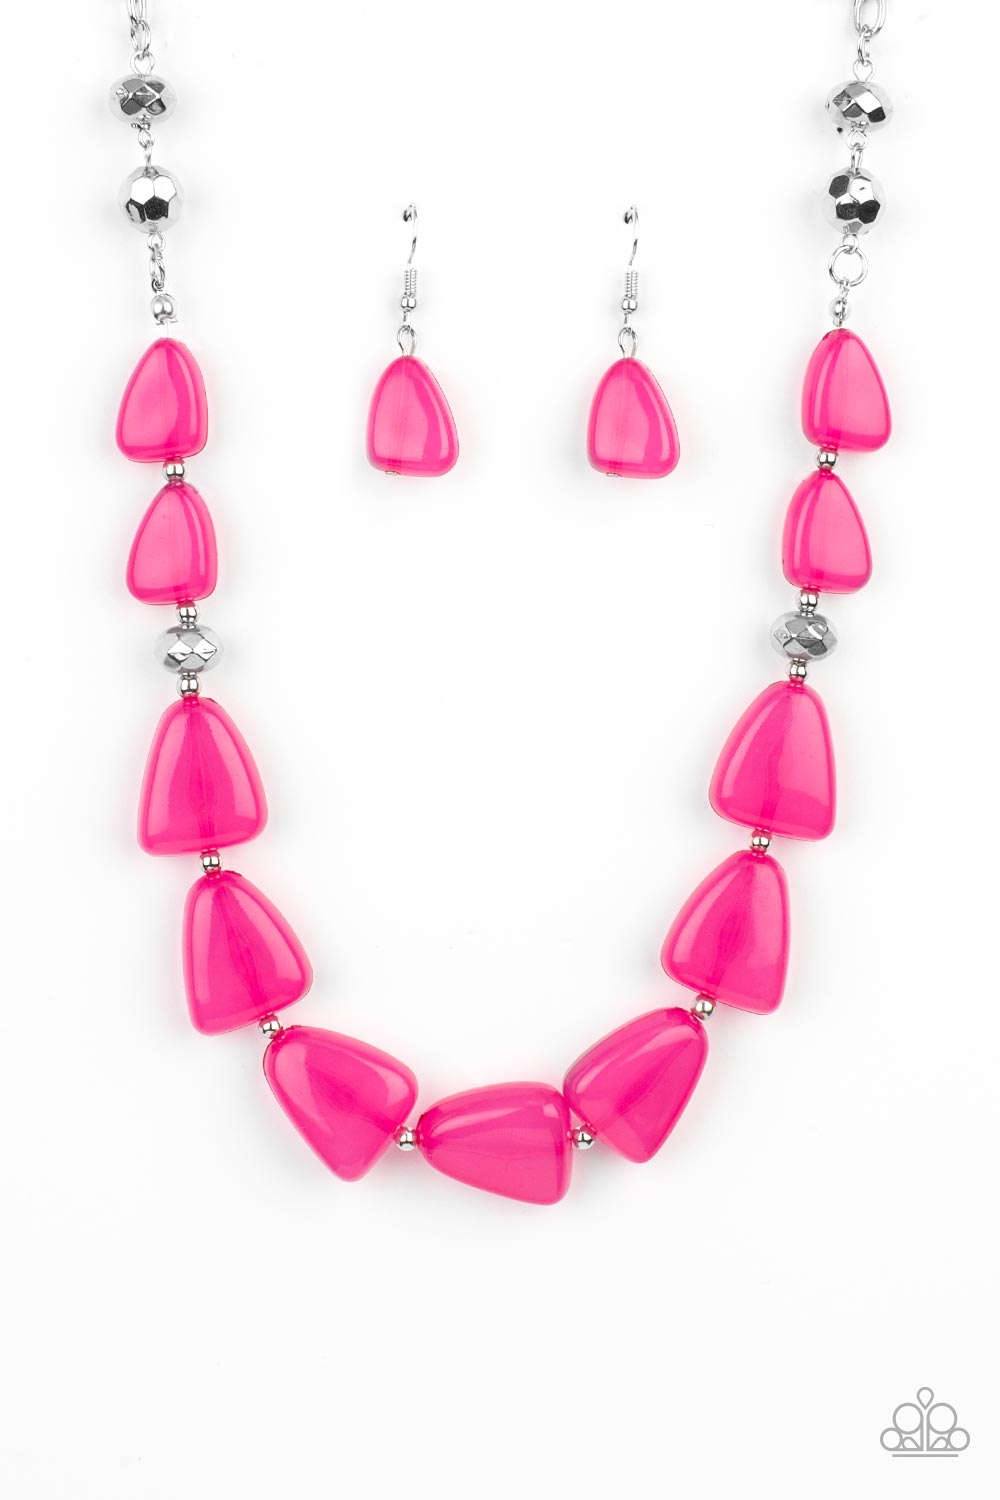 Infused with dainty silver and faceted silver beads, imperfect triangular opaque Fuchsia Fedora beads are threaded along an invisible wire below the collar for a vivacious pop of color. Features an adjustable clasp closure.